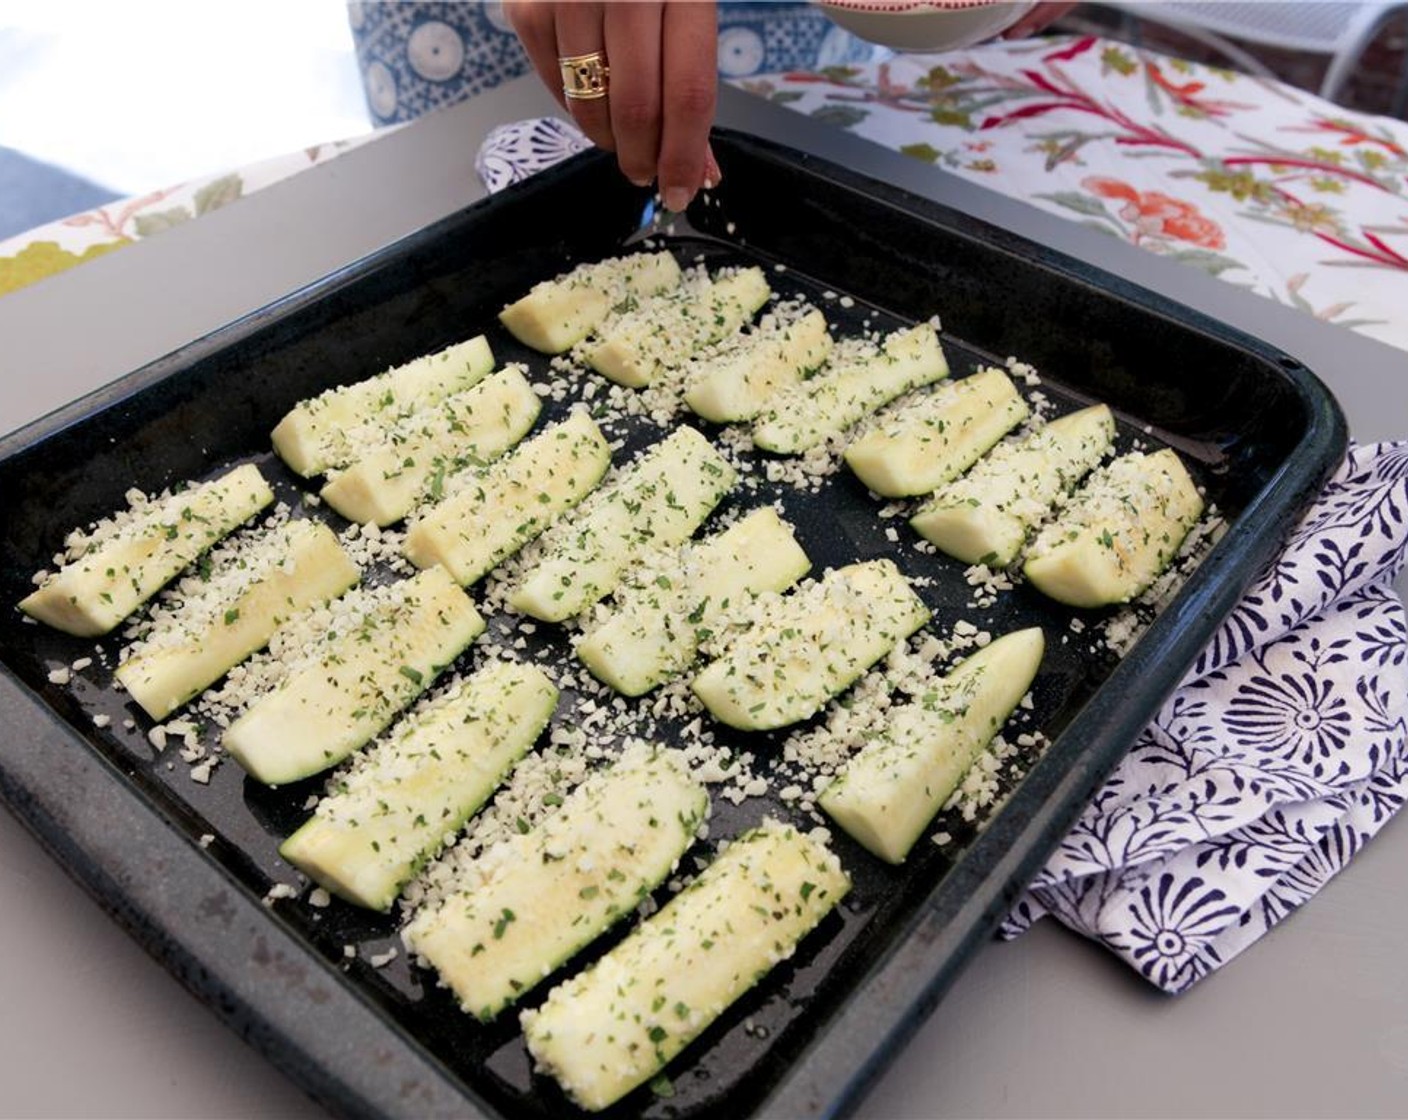 step 4 Sprinkle the tops of each piece with the chopped herbs and Parmesan Cheese (1/2 cup)/ Bake until tender, about 15 minutes. You can also broil for an additional 2-3 minutes so the tops are crisp and golden brown.